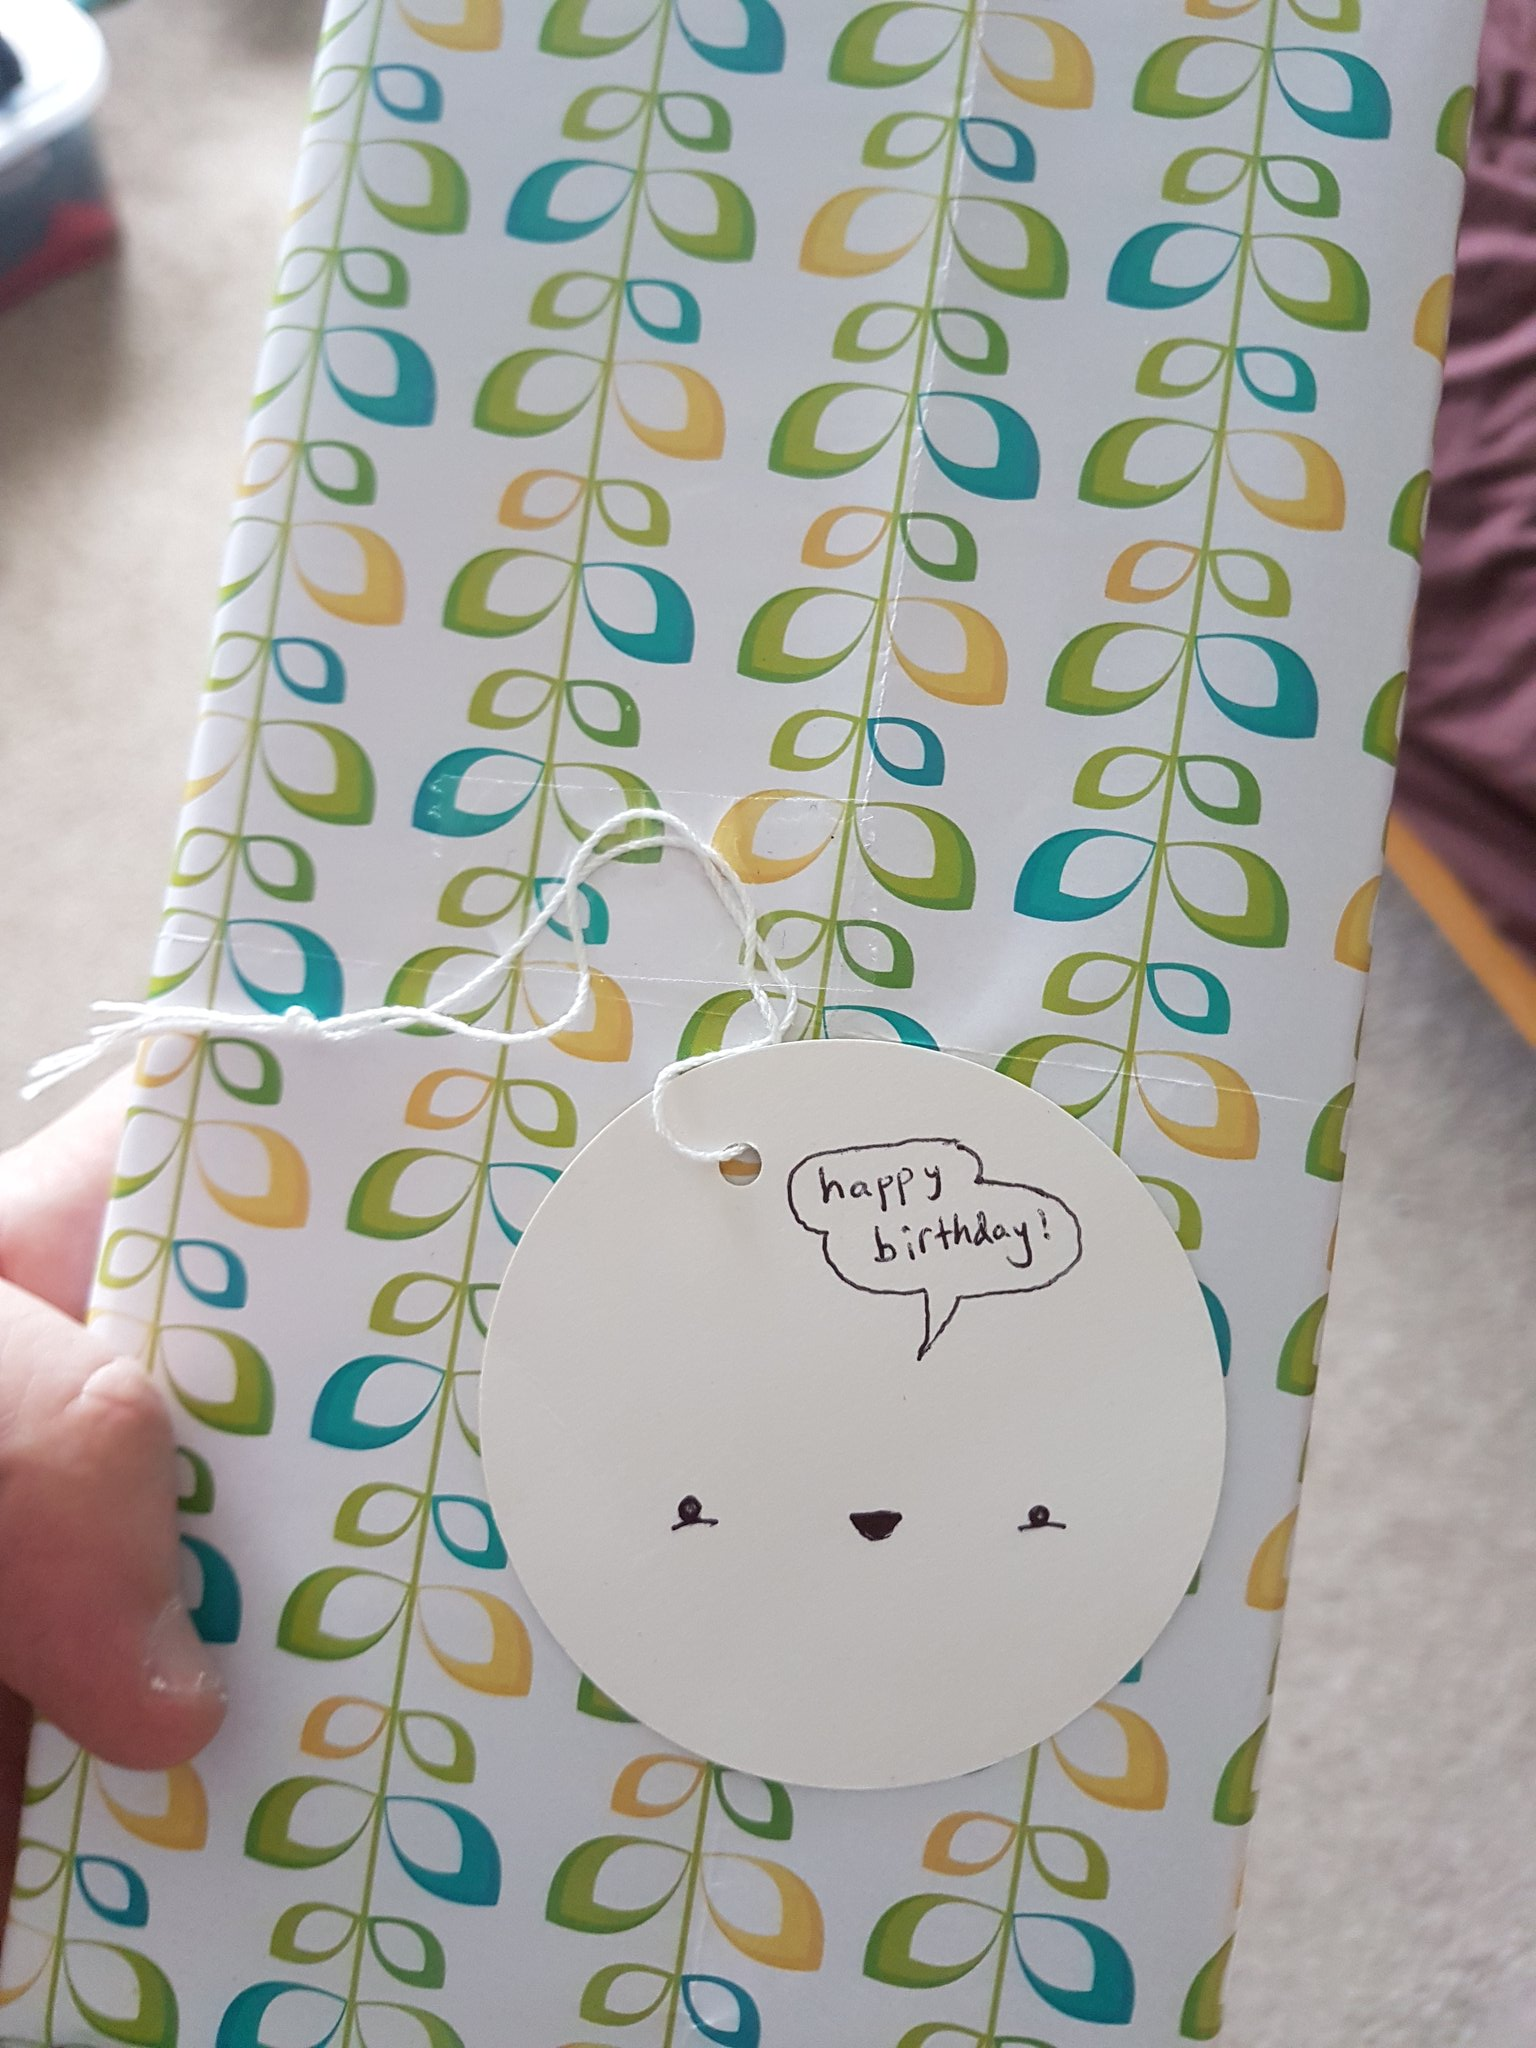 A photograph of a rectangular gift wrapped in paper with a design resembling leaves on plant stems in yellow, green and blue, with a white, circular gift tag in the middle. The tag has a smiling small robot style face drawn on it and a speech bubble that reads "happy birthday!".